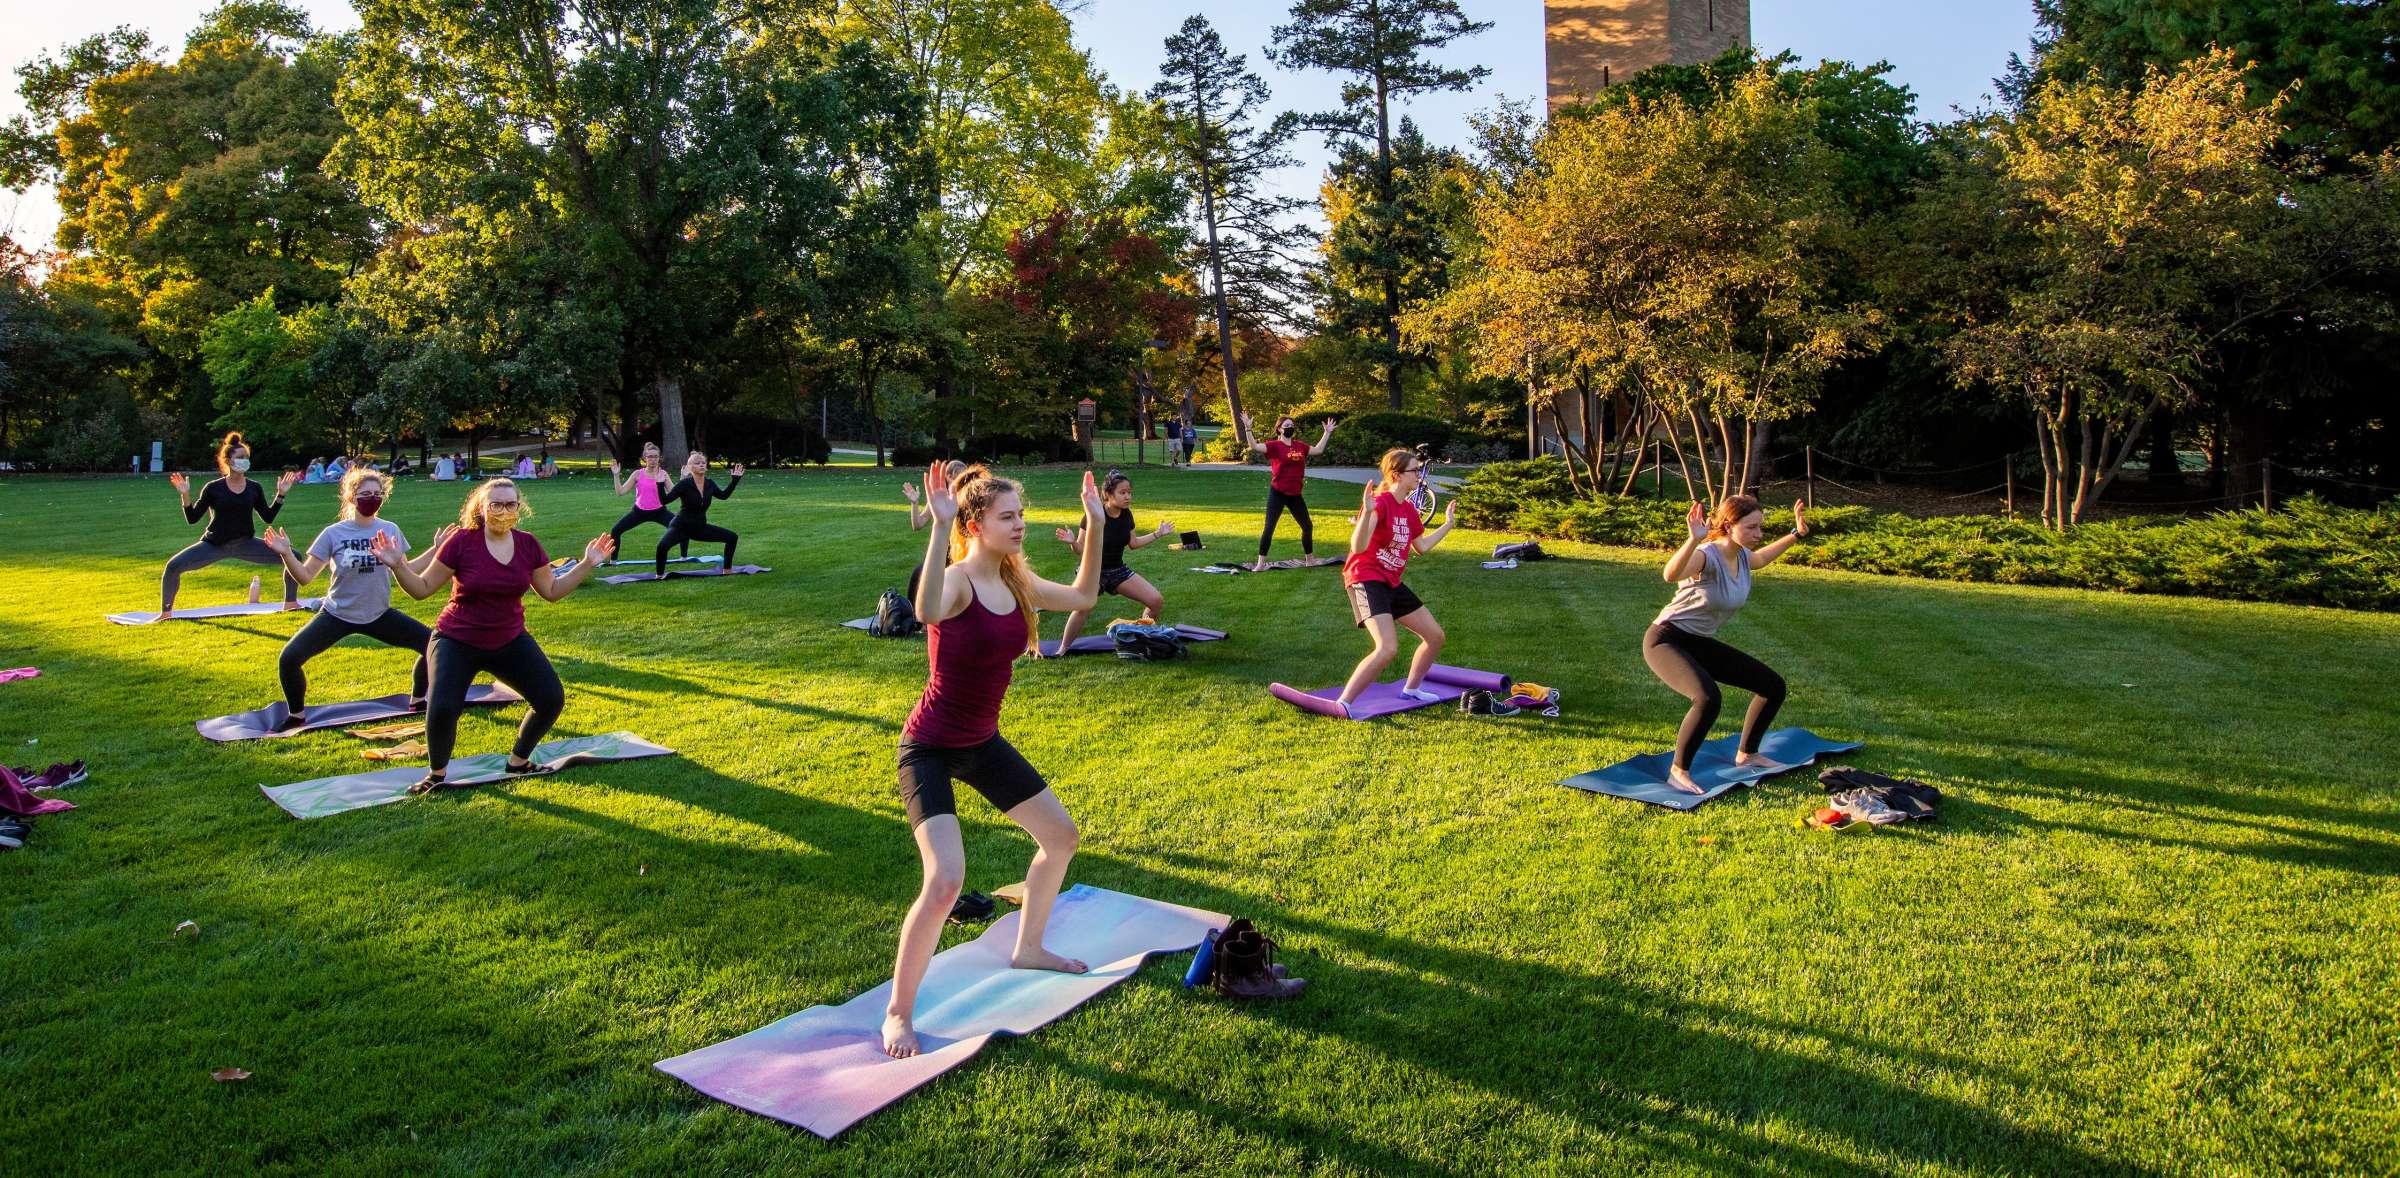 Yoga on central campus